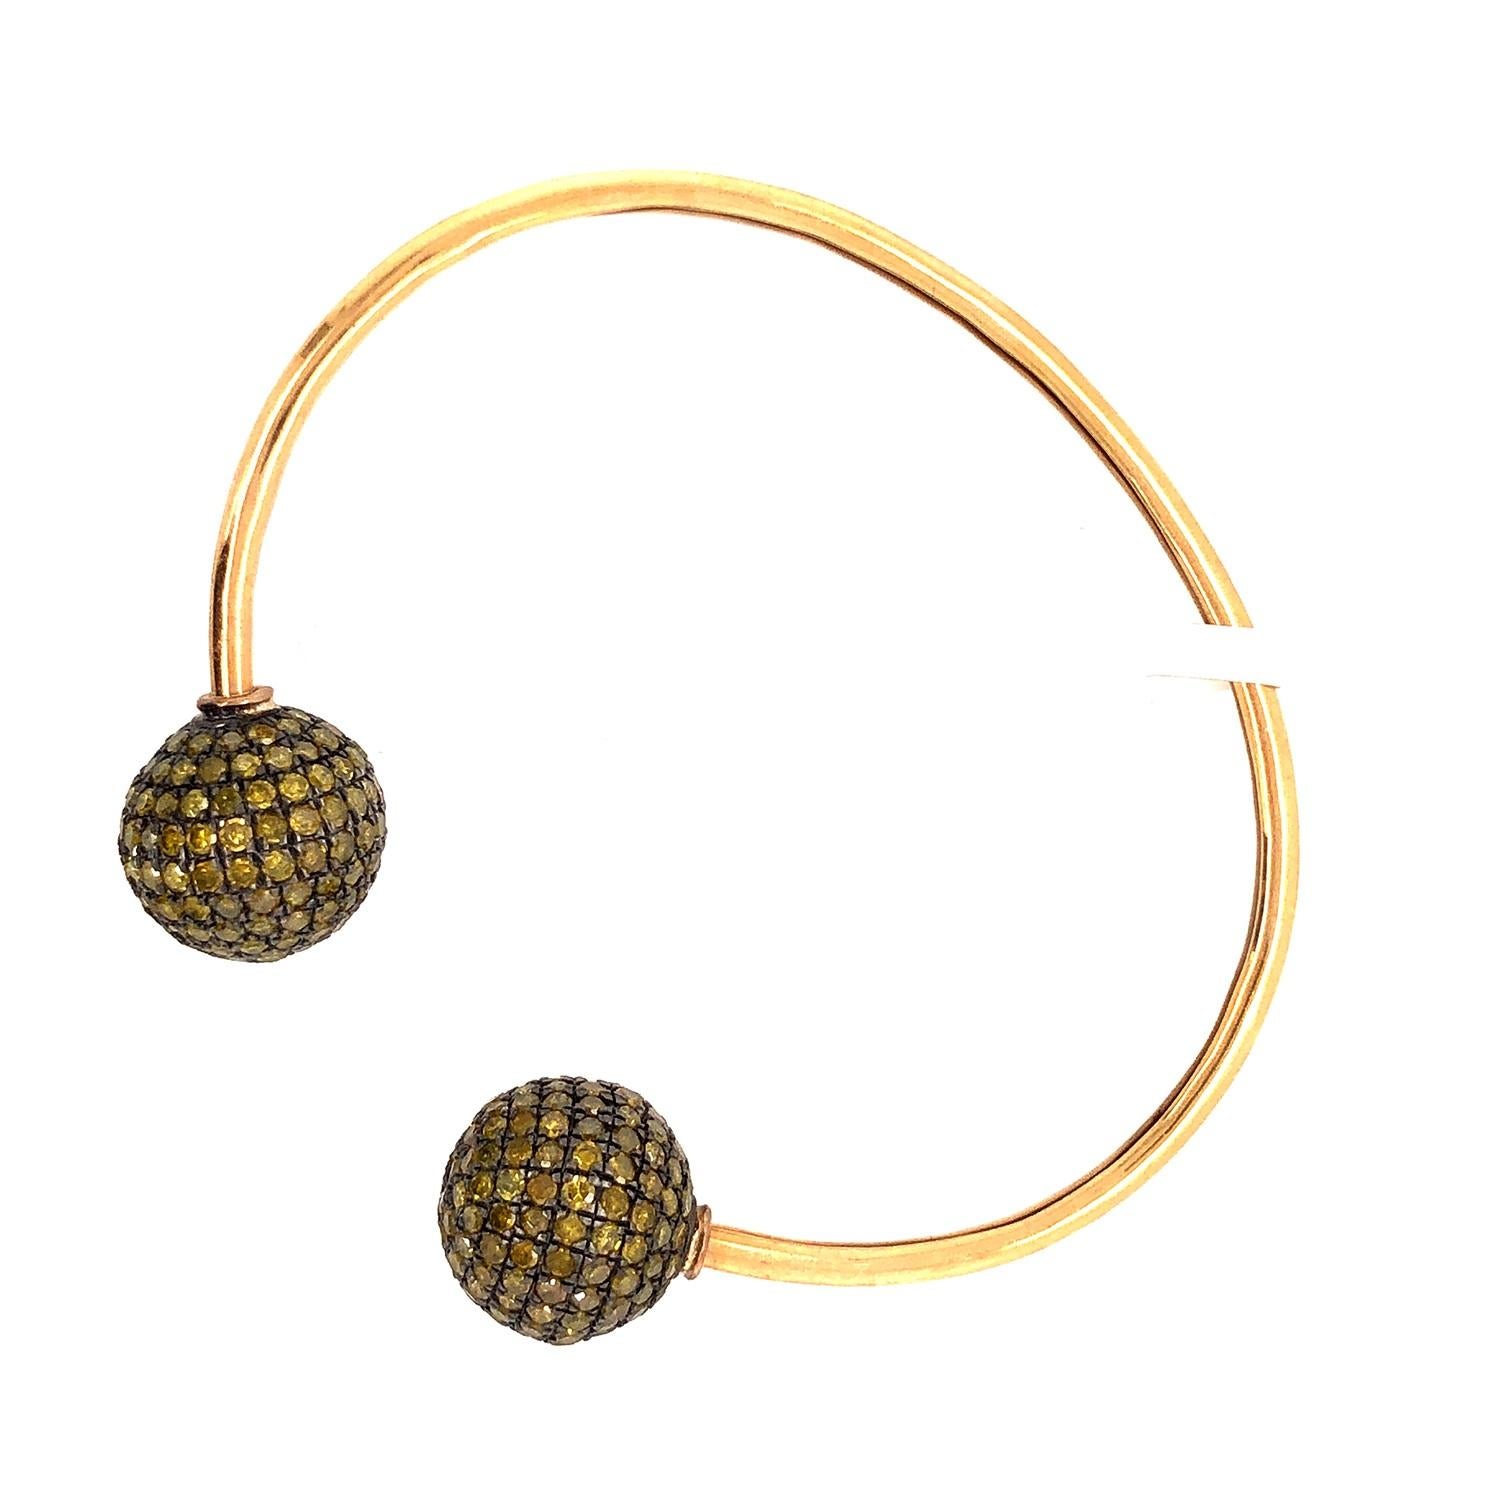 Mixed Cut Yellow Pave Diamond Ball Flexible Bangle Made in 18k Gold For Sale